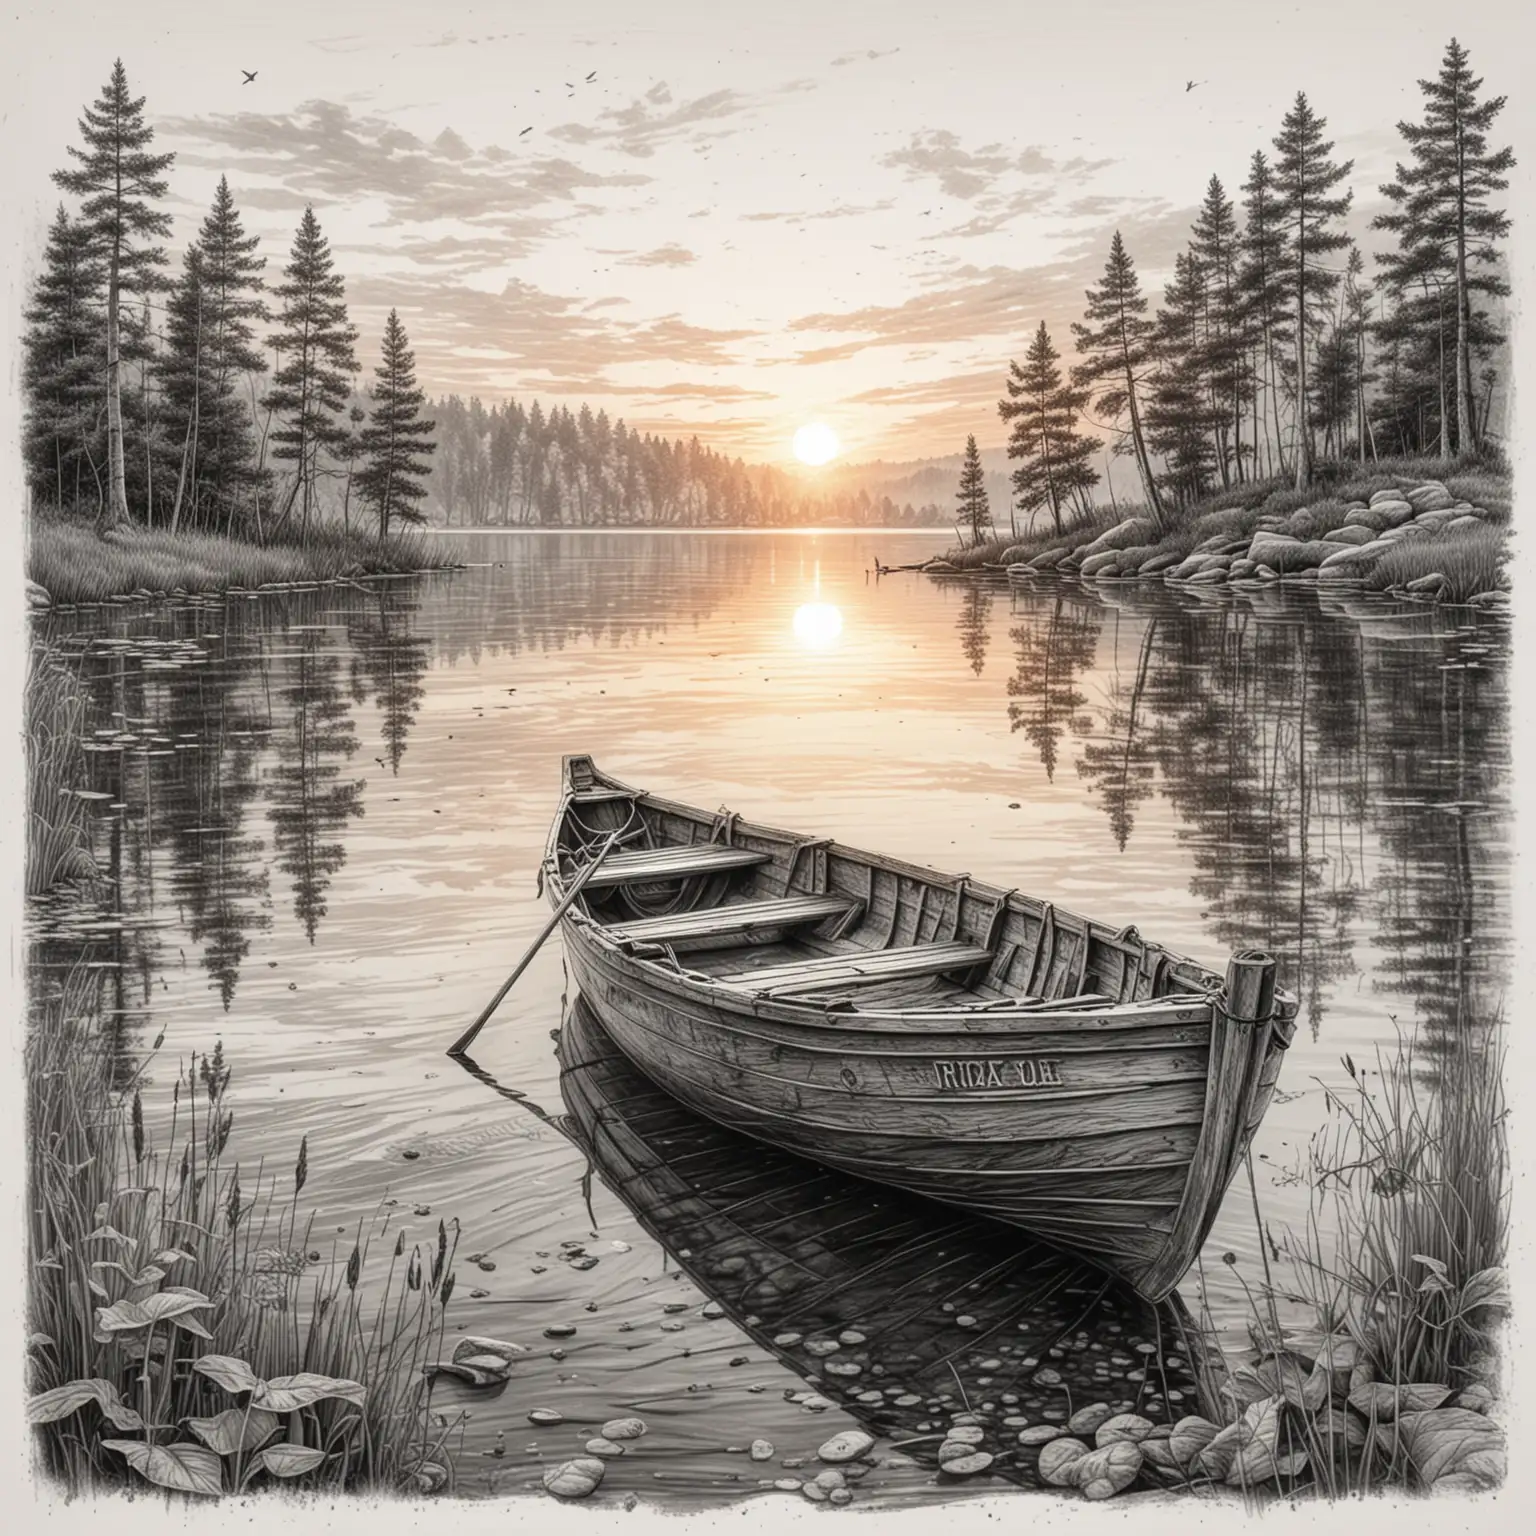 Realistic-Pencil-Drawing-of-a-Detailed-Sunset-at-a-Lake-Shore-with-a-Wooden-Boat